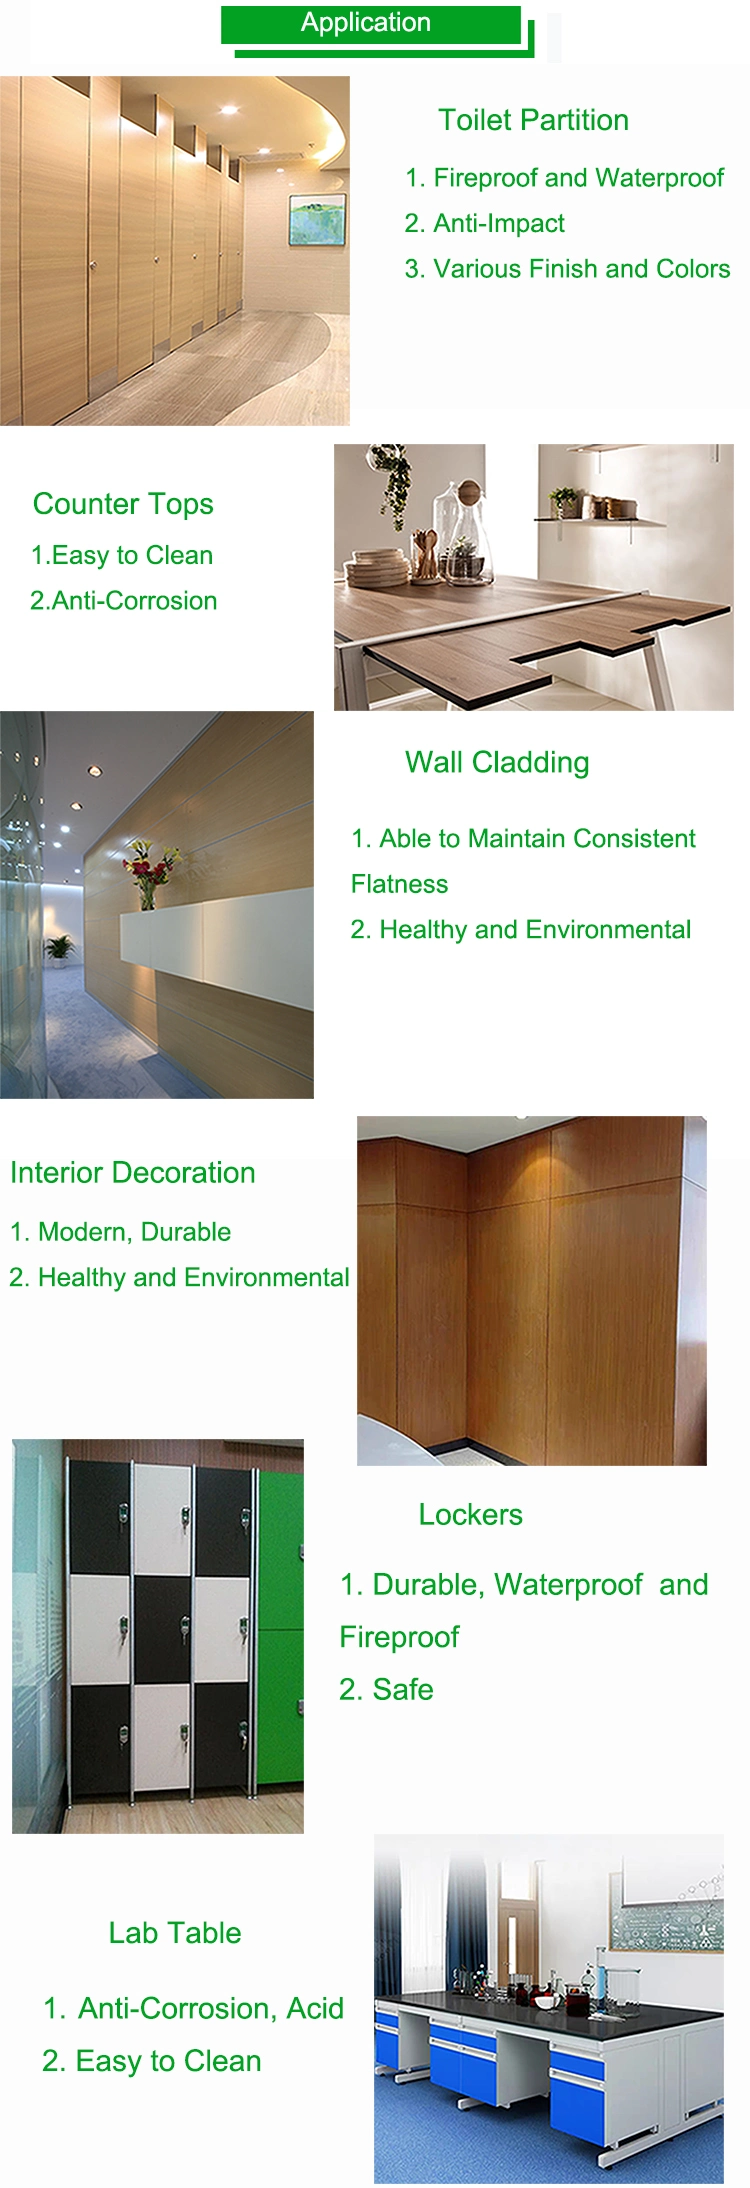 High Quality Laminate HPL Cabenit, Compact Laminate of Phenolic Resin Board for Interior Wall Cladding